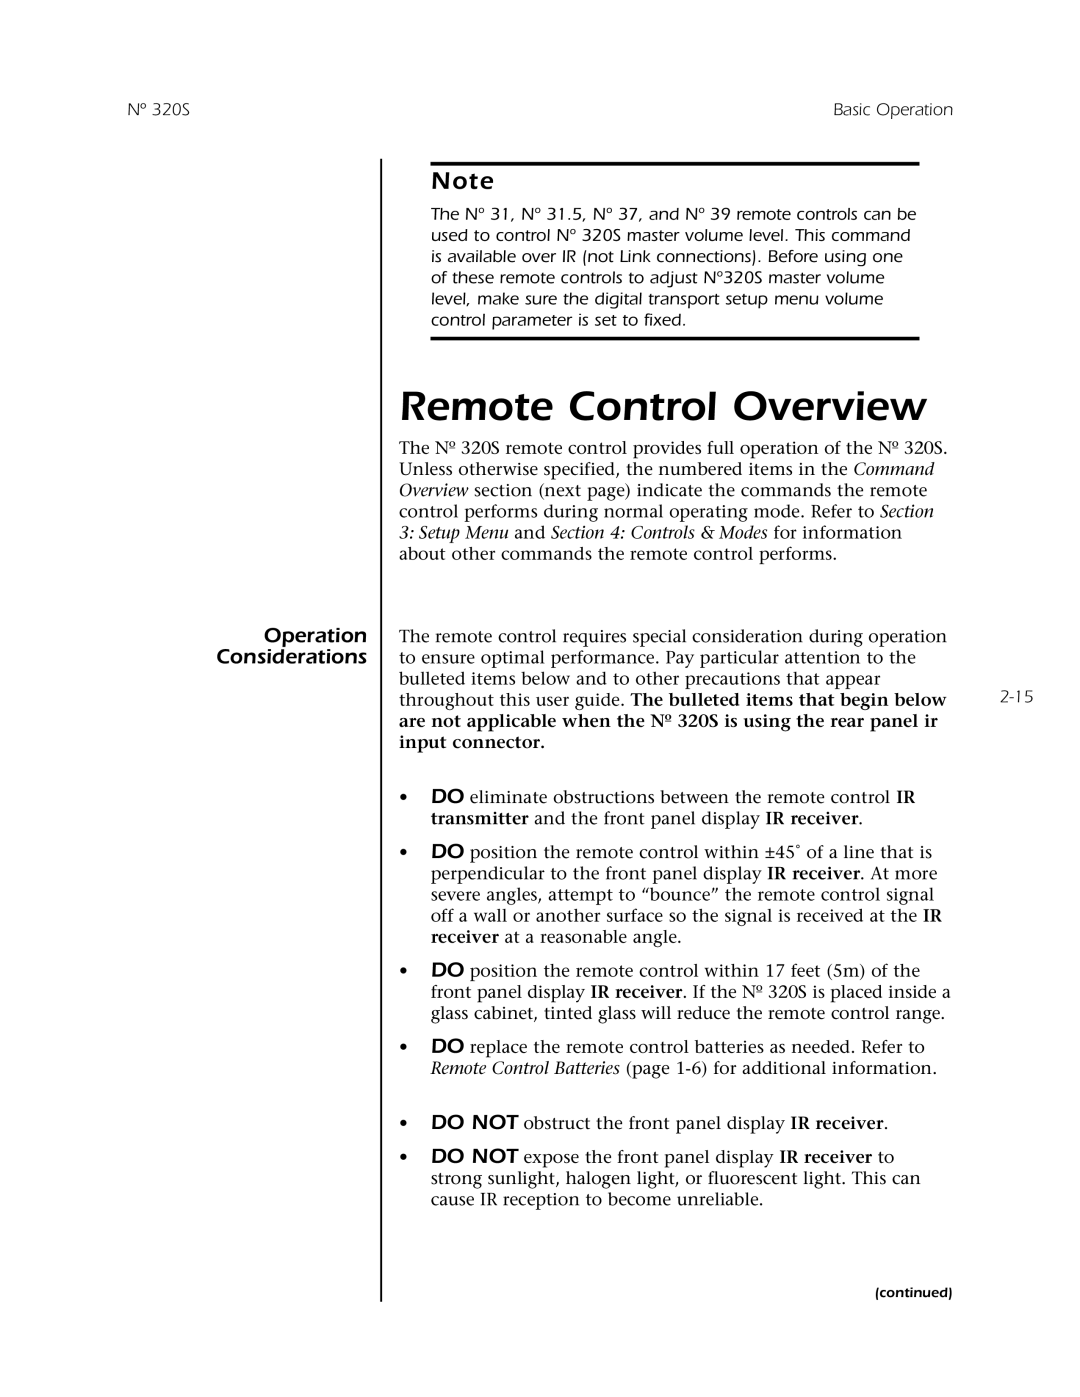 Mark Levinson N 320S owner manual Remote Control Overview, Operation Considerations, input connector 